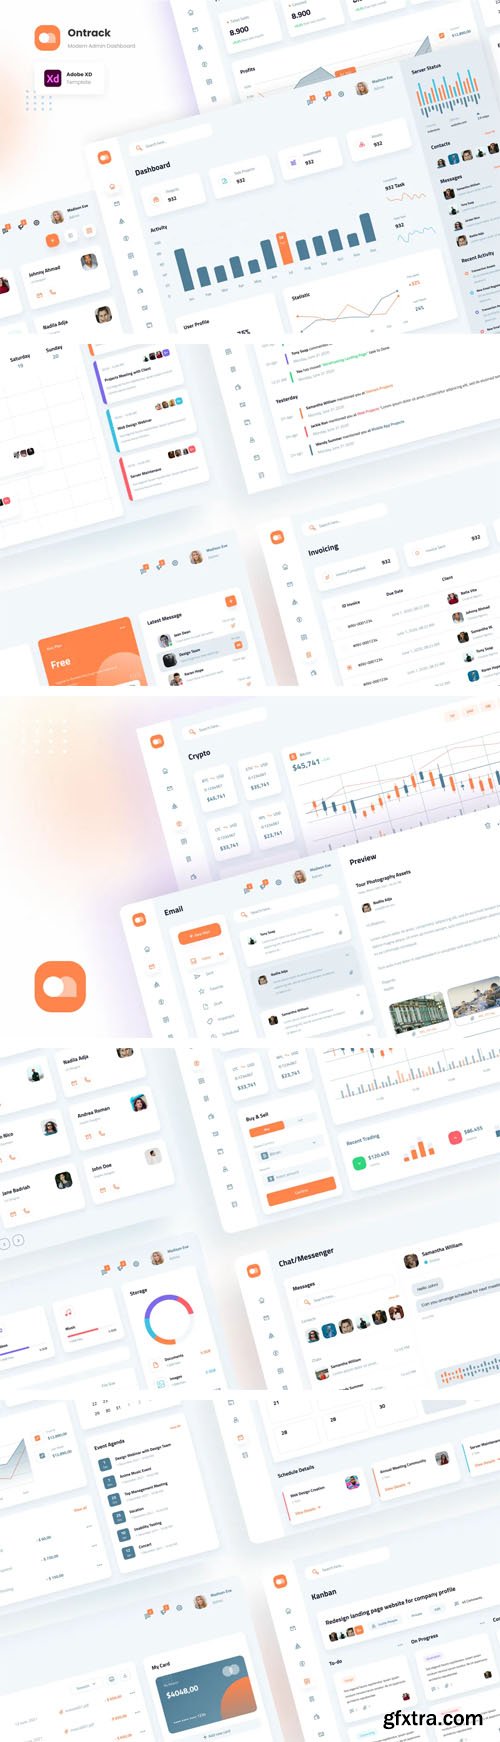 Ontrack - Modern Admin Dashboard Template for Adobe XD and Figma